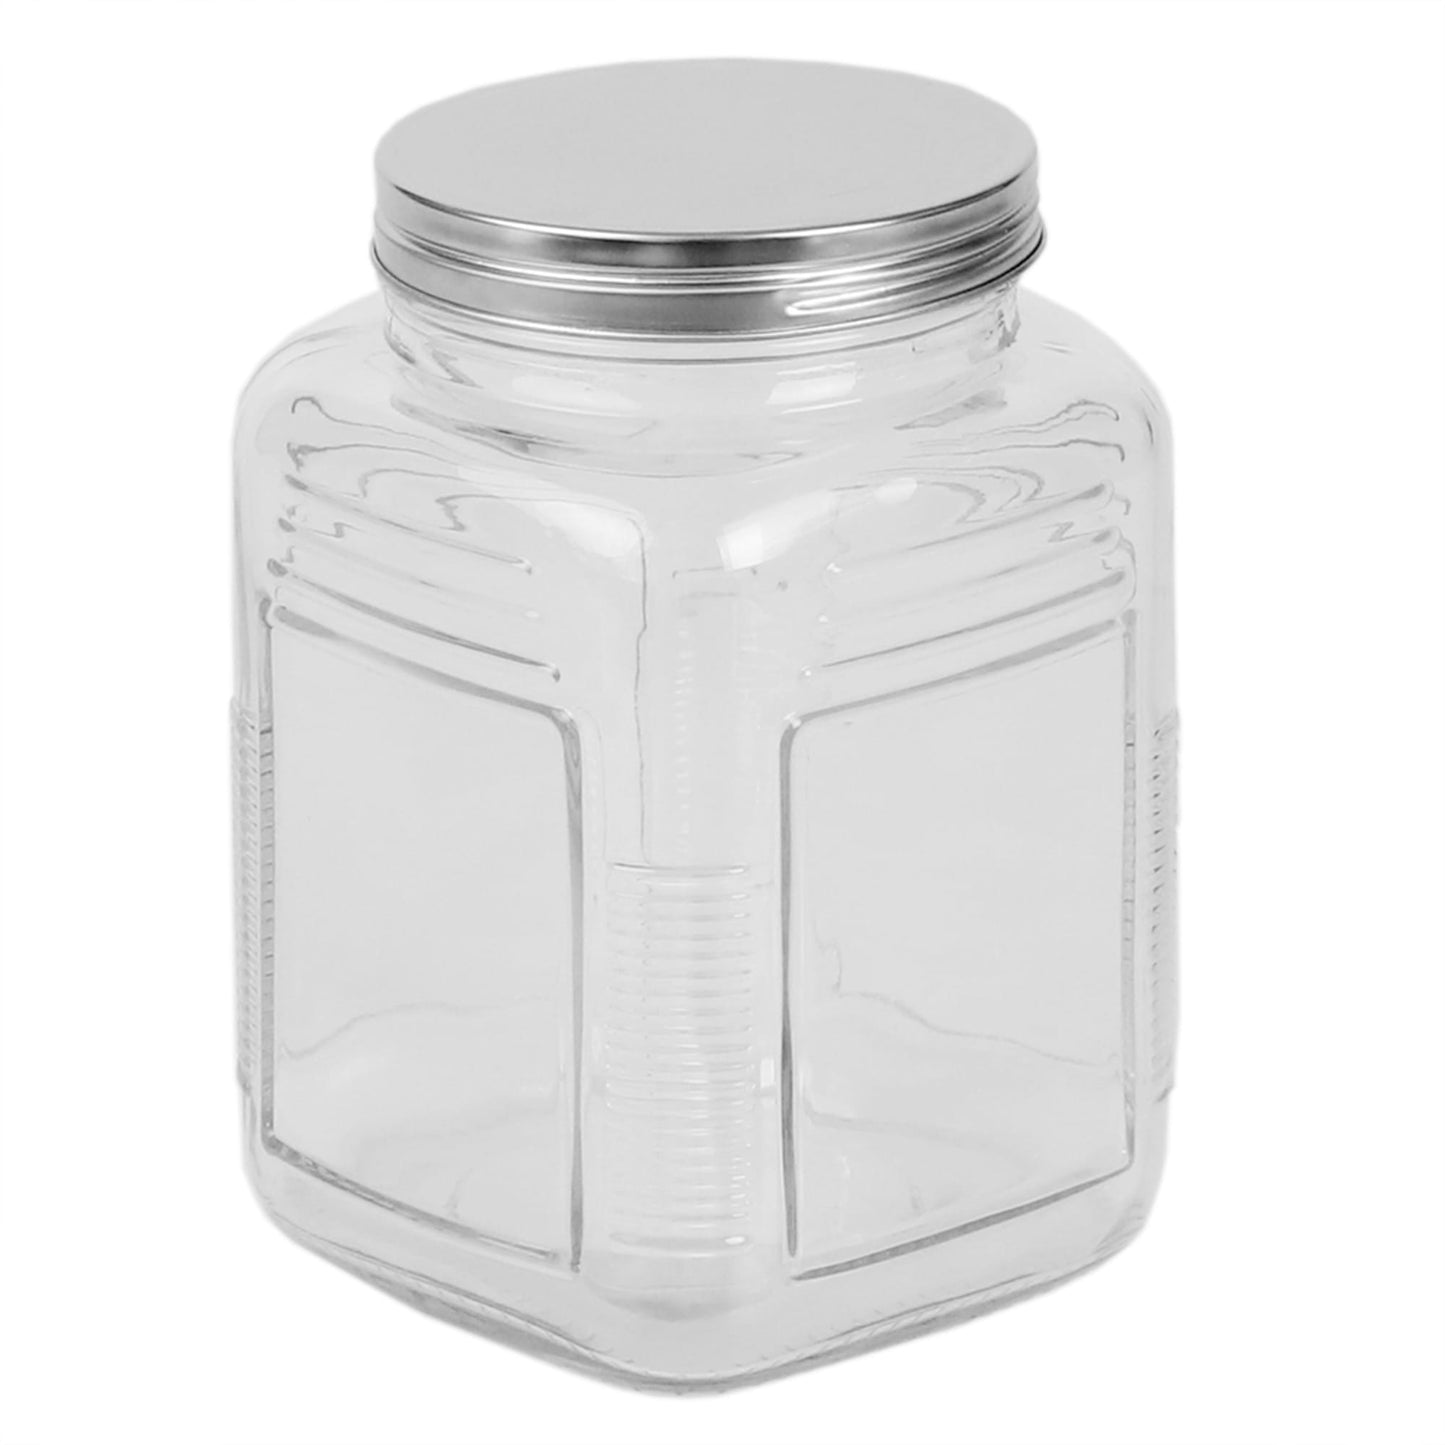 Province 1.5 Lt Glass Canister with Metal Lid